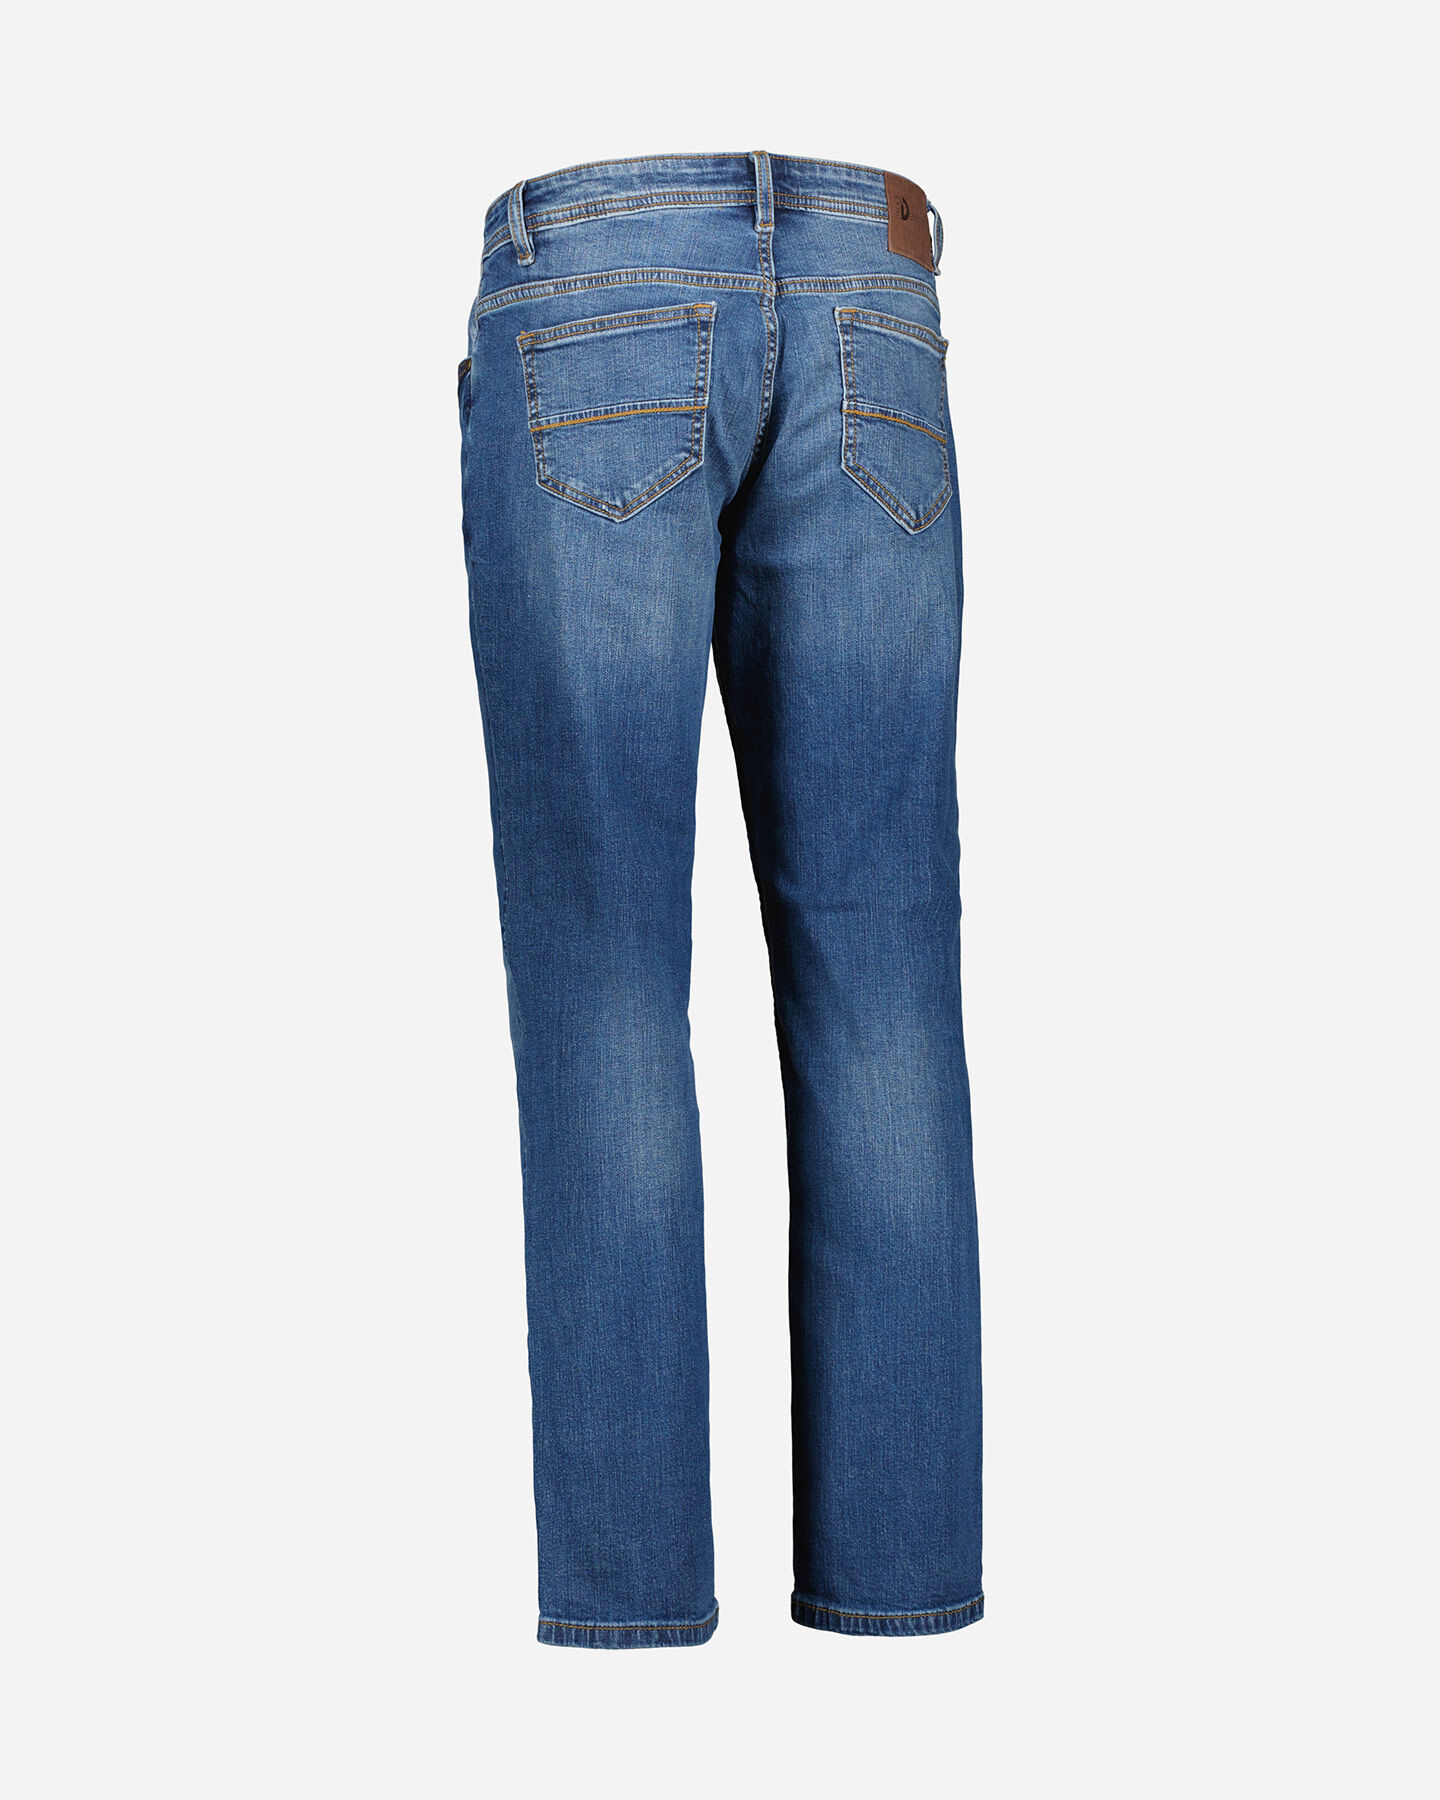  Jeans DACK'S CASUAL CITY M S4106781|MD|48 scatto 5